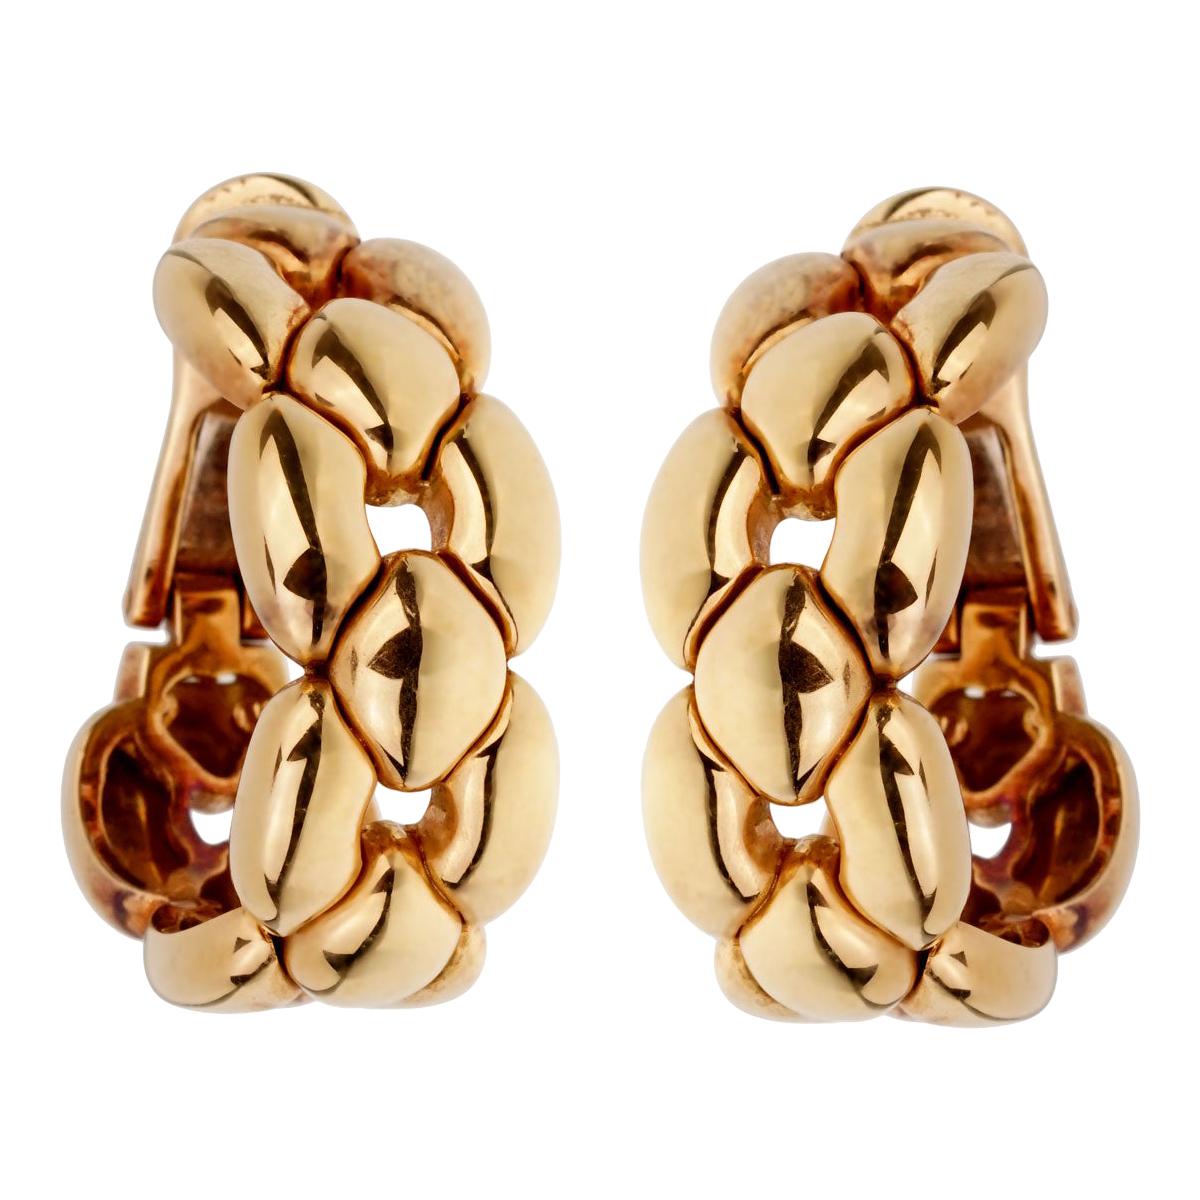 A magnificent set of Cartier hoop earrings crafted in 18k yellow gold. The earrings measure .50